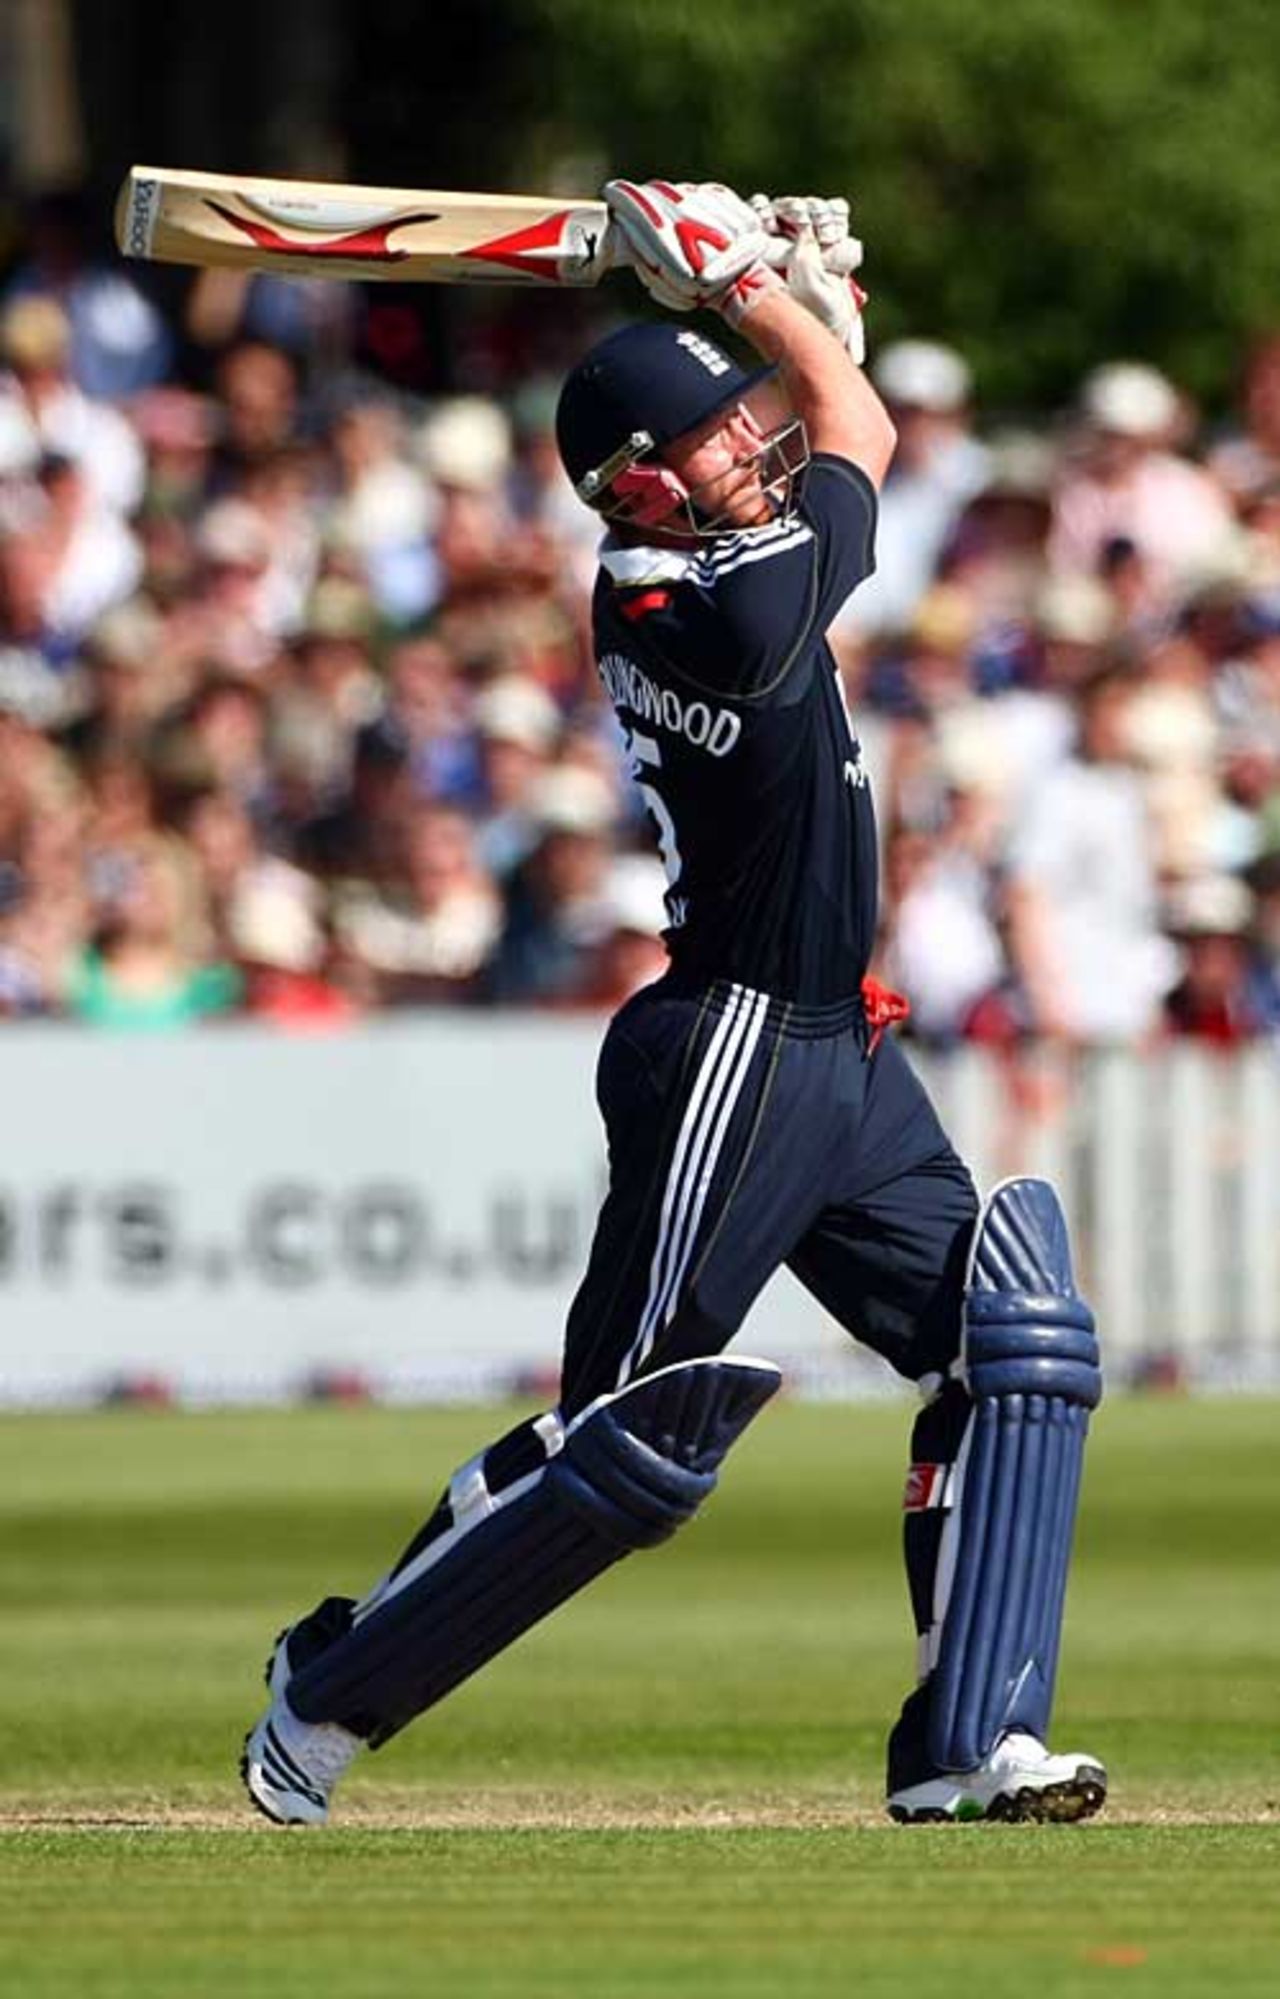 Paul Collingwood goes down the ground during his unbeaten 47, England v West Indies, 2nd ODI, Bristol, May 24, 2009